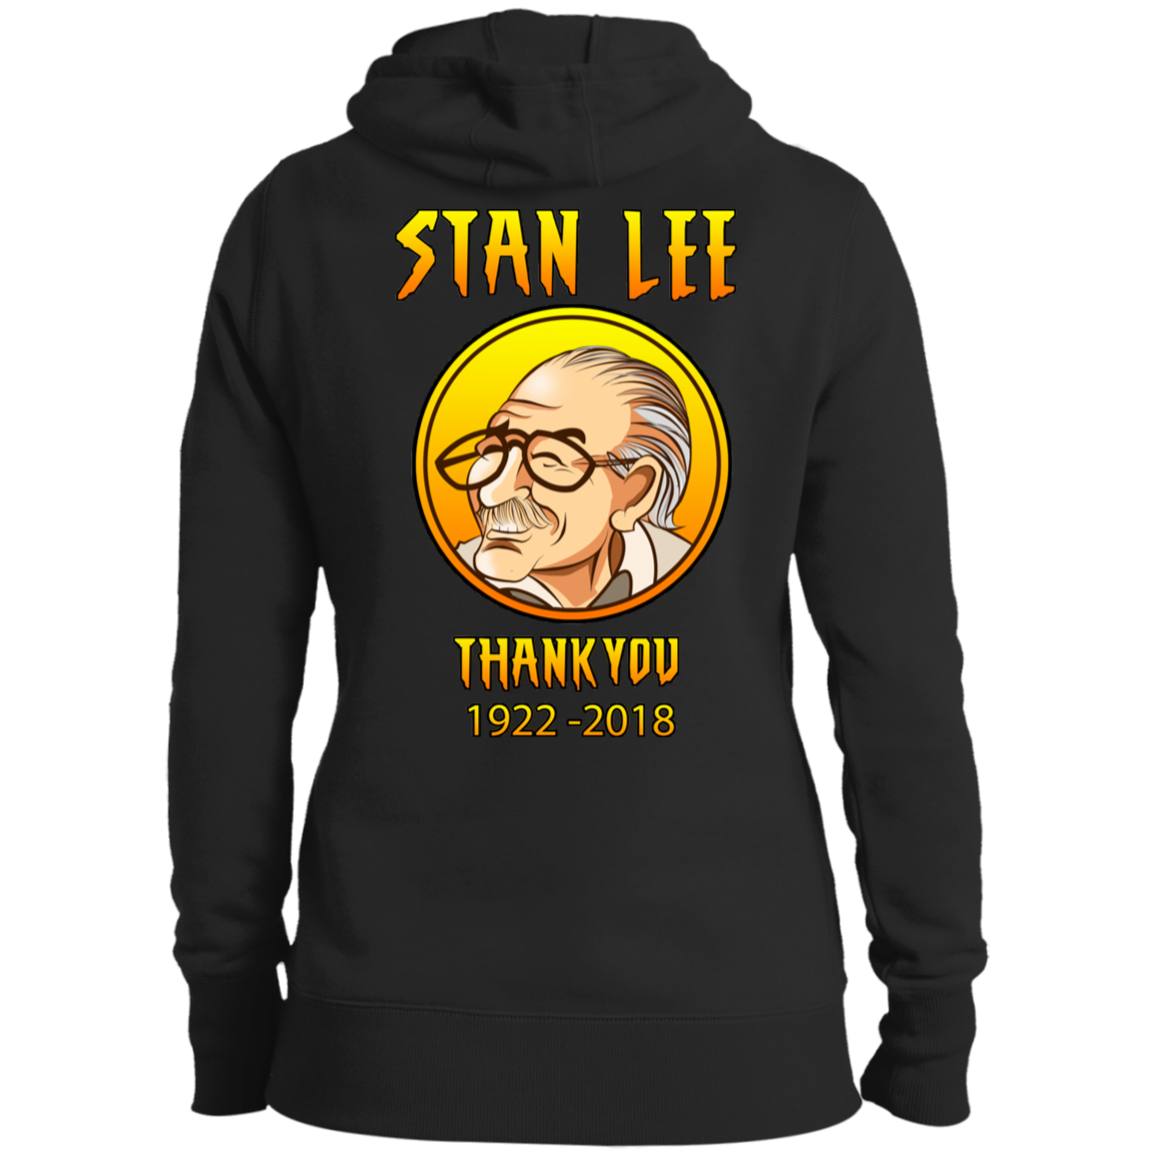 ArtichokeUSA Character and Font design. Stan Lee Thank You Fan Art. Let's Create Your Own Design Today. Ladies' Pullover Hooded Sweatshirt